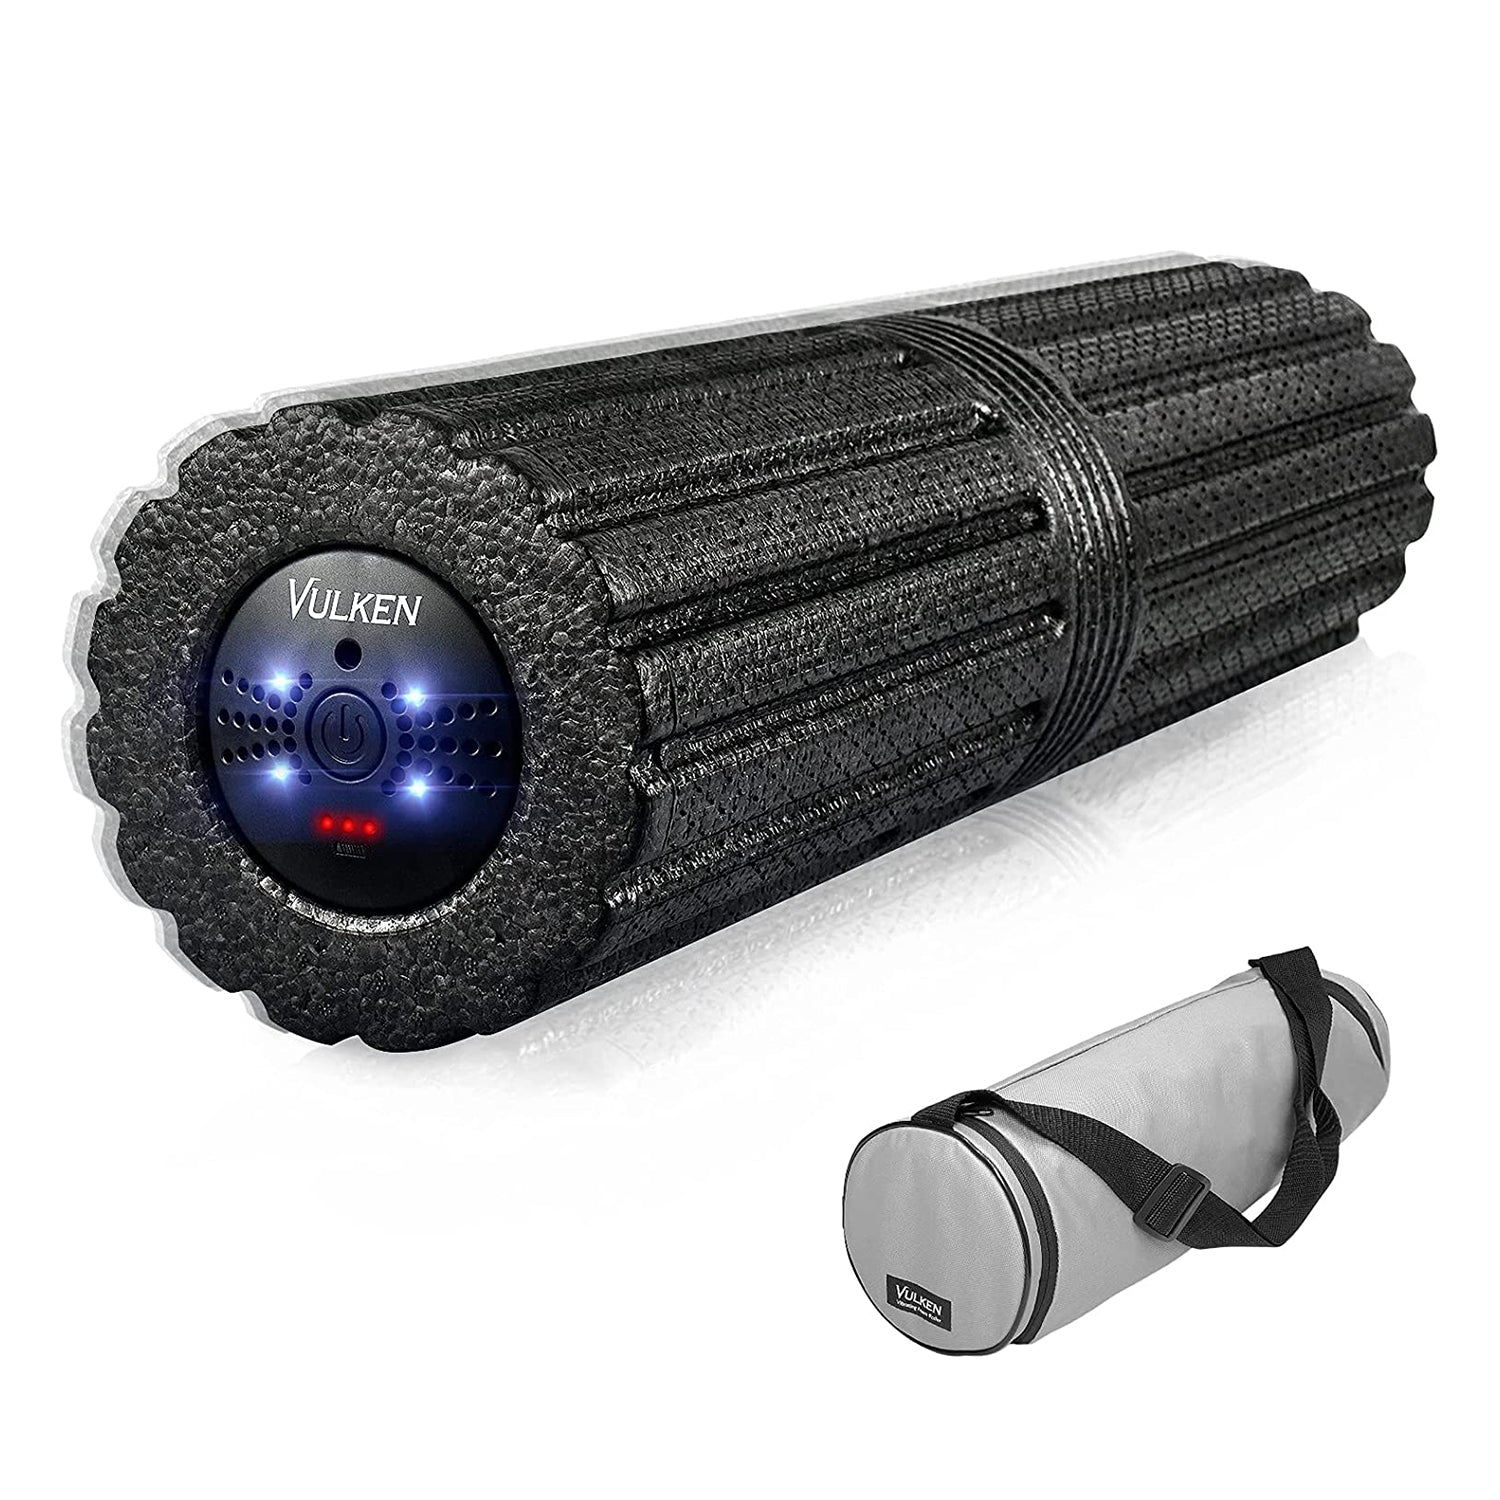 Vulken Extra Long 17? Vibrating Foam Roller 4 Speeds 3800RPM High Intensity Quick Charge Electric Foam Roller Tissue Massager for Muscle Recovery